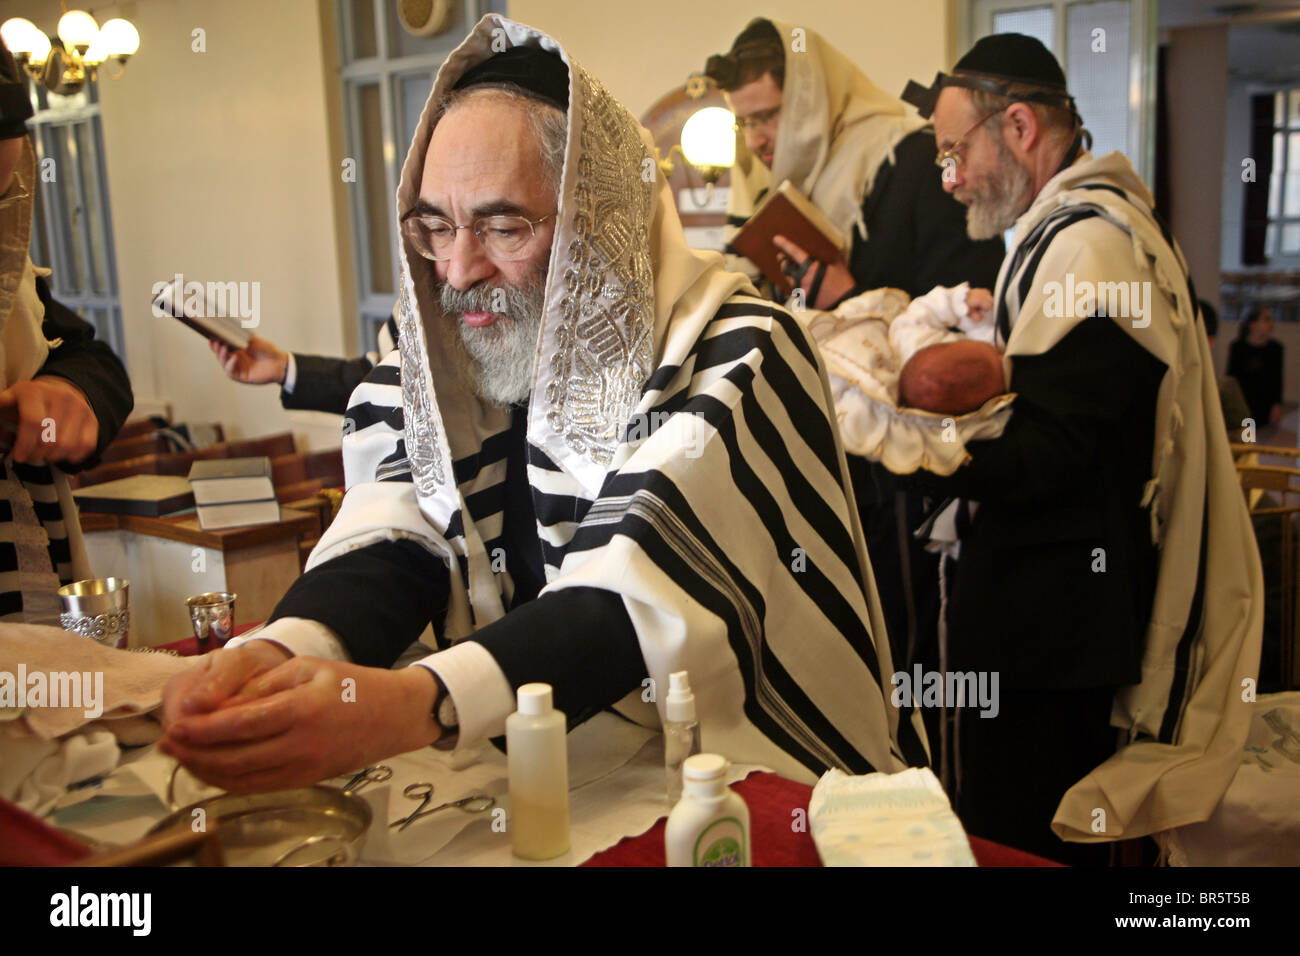 The Mohel washes his hands before the circumcision ceremony begins. On the 8th day after birth a Brit Milah is performed. Stock Photo